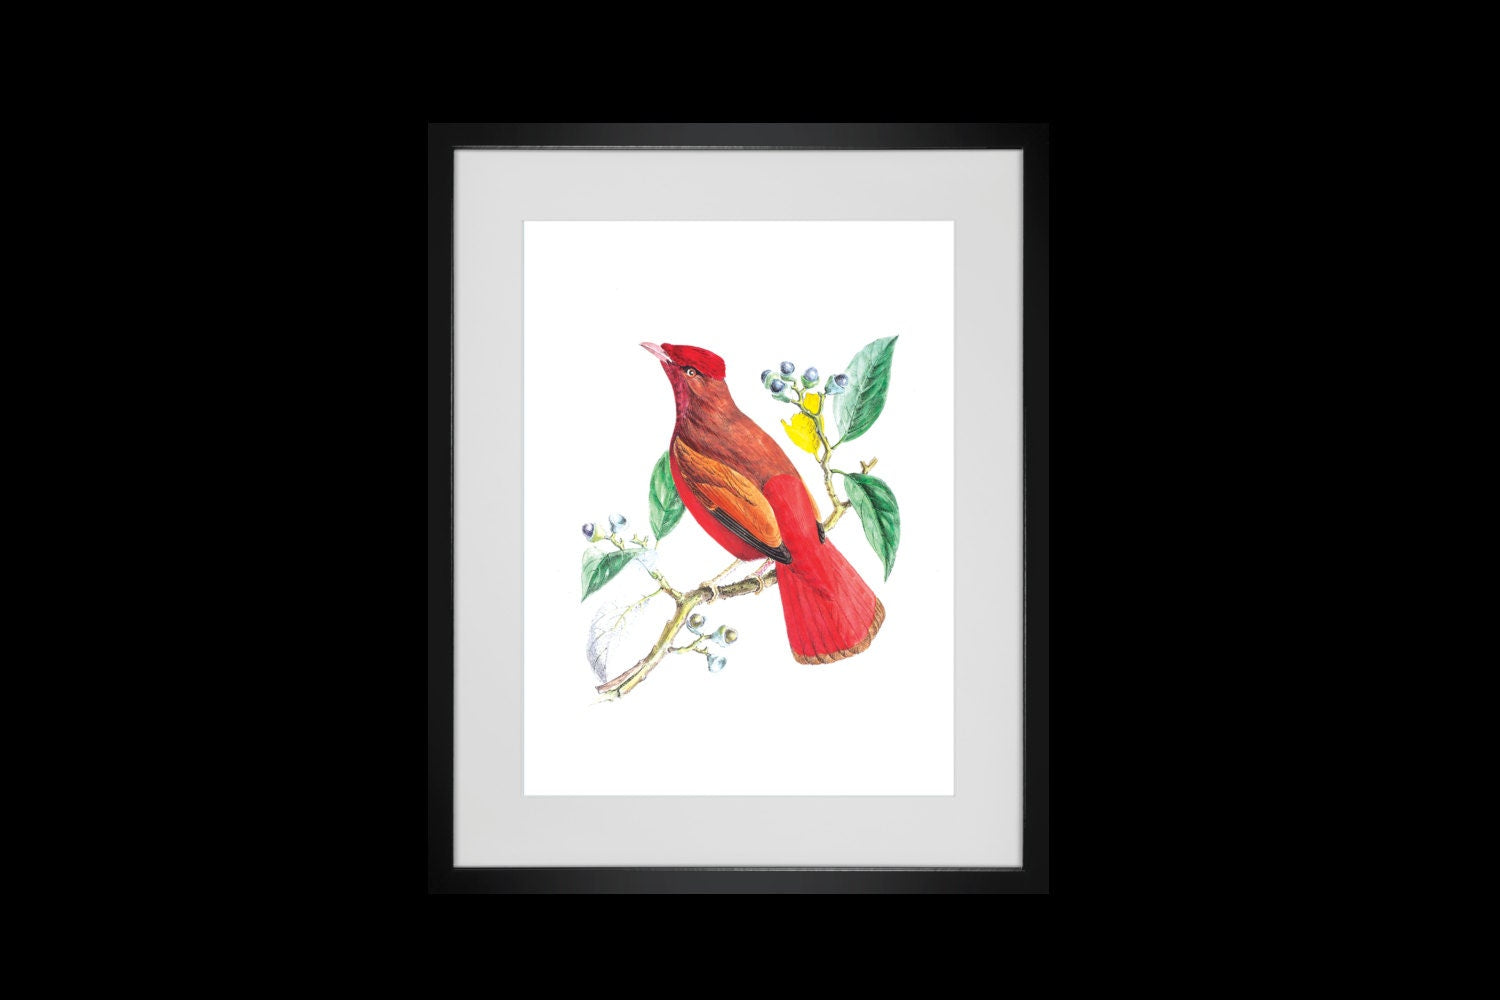 Antique Bird Prints Wall Decor 4 Colorful Bird Art Prints For Bedroom, Living Room Kitchen Pictures Vintage Scientific Illustration Wall Art